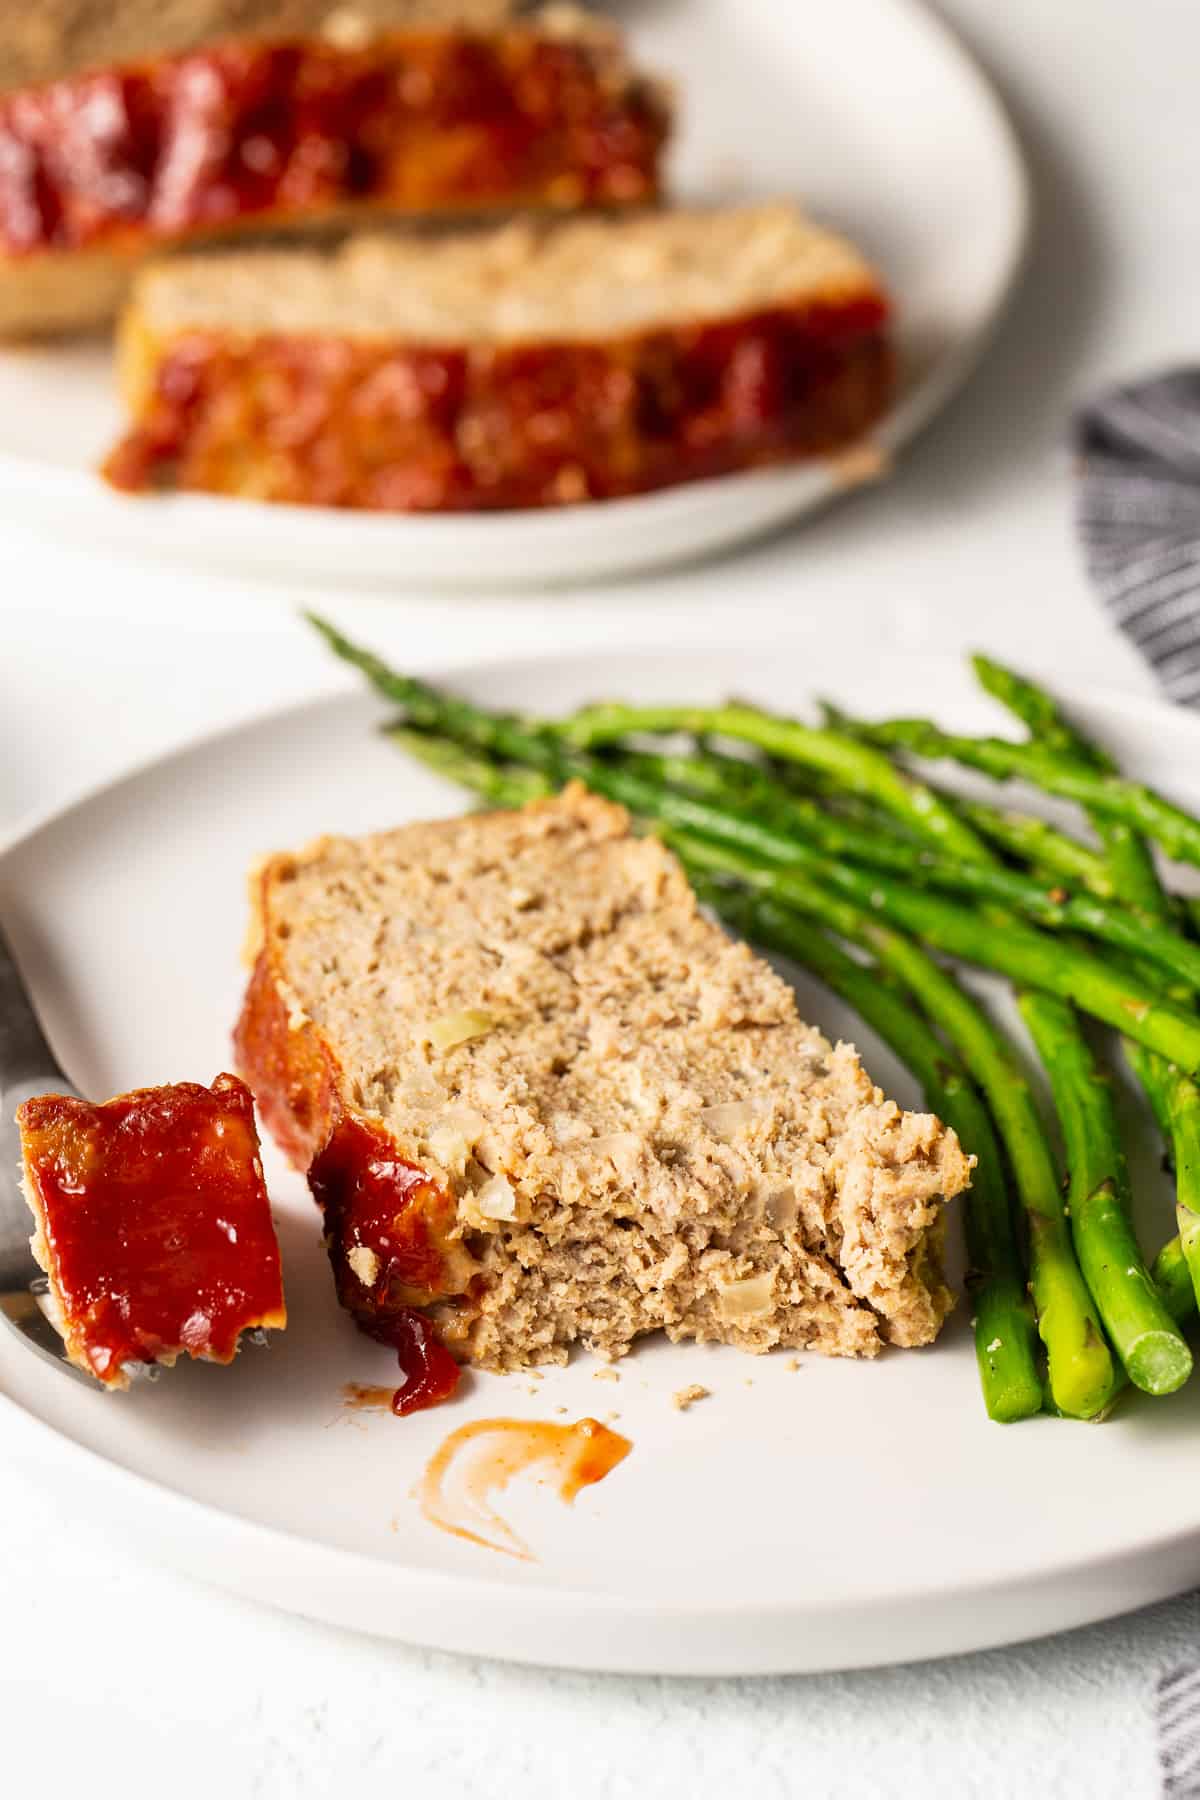 Slice of ground turkey meatloaf on a plate with asparagus.